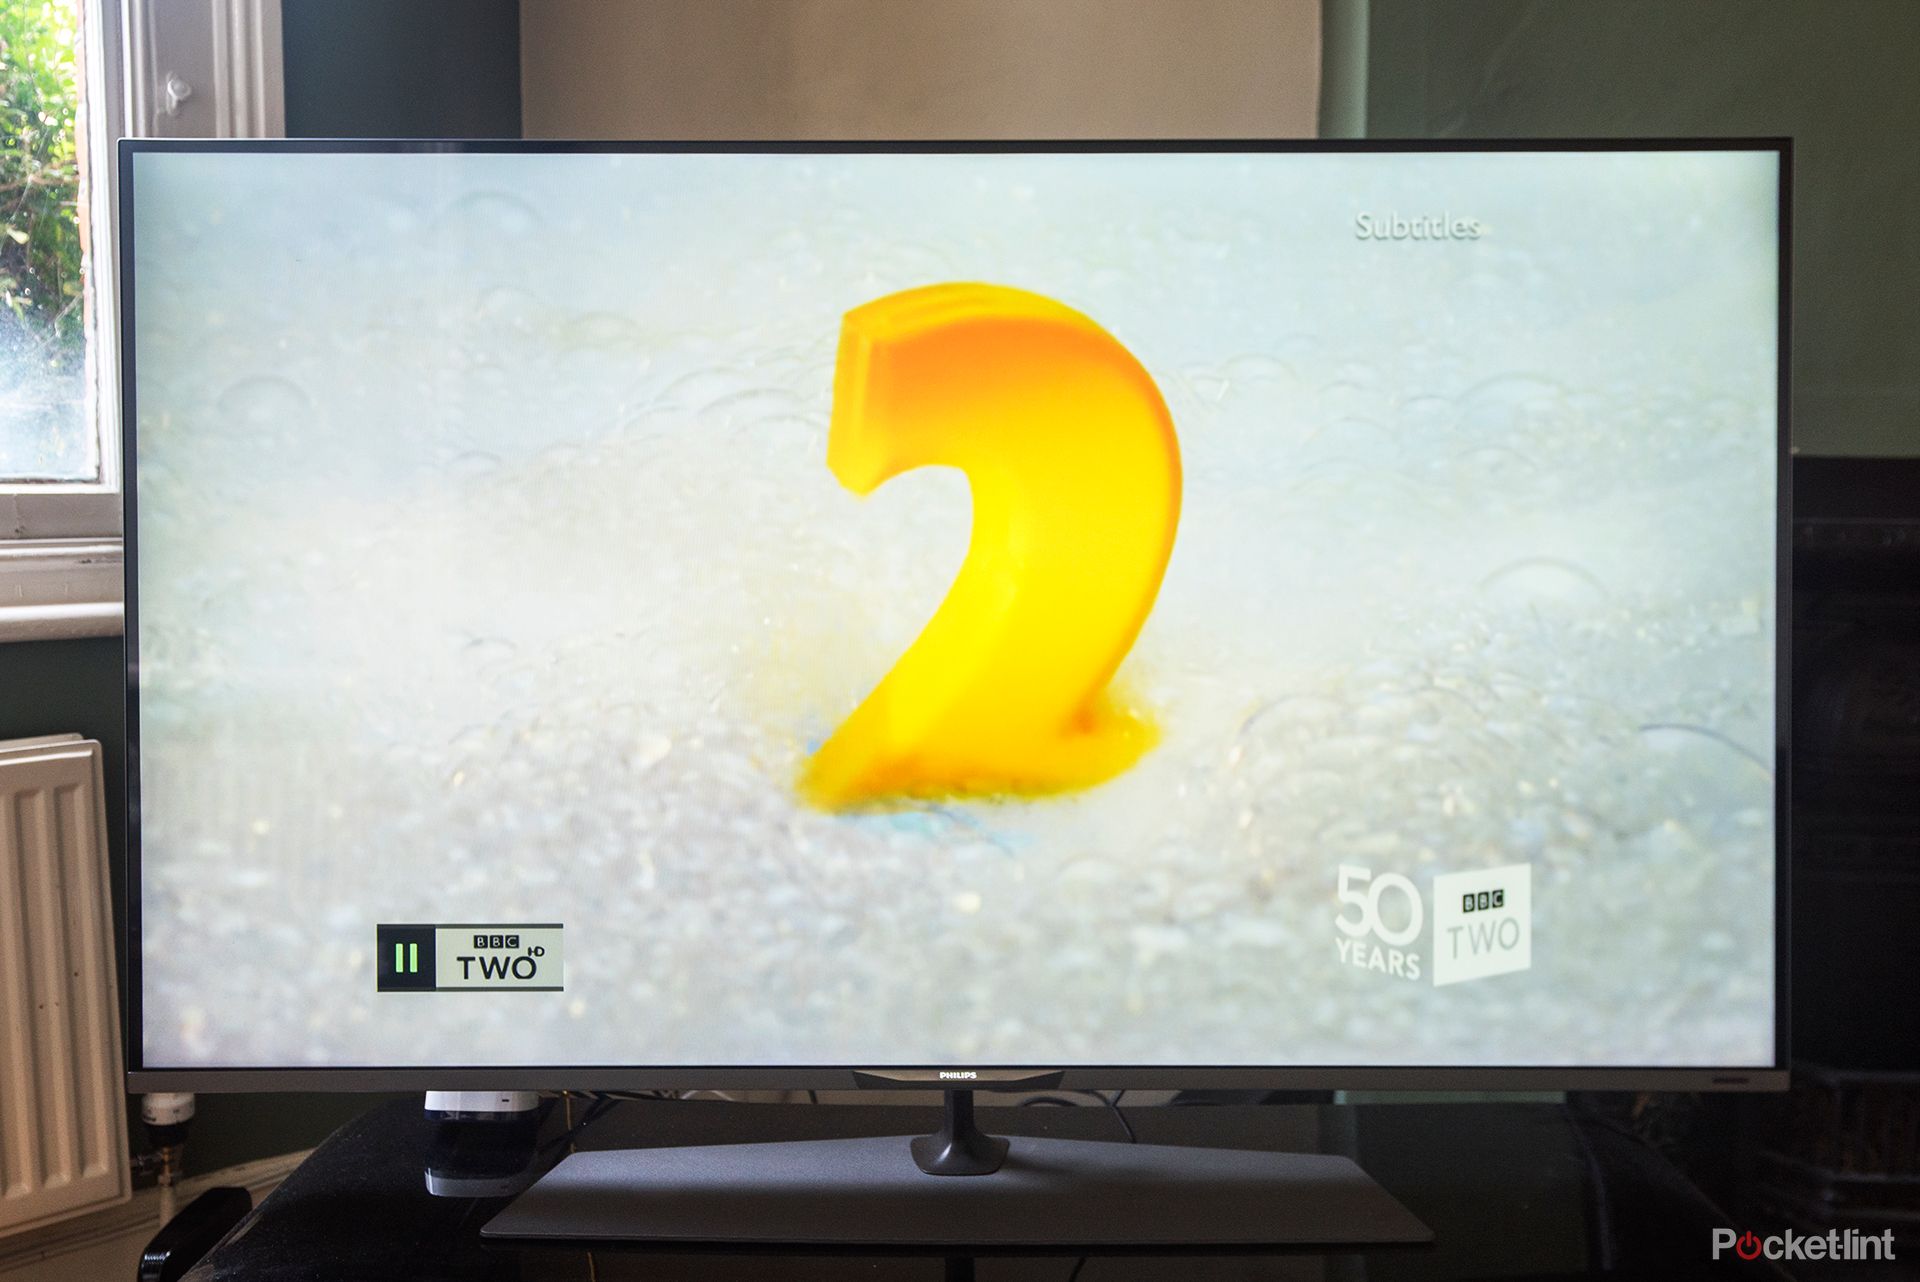 philips 7800 series 55 inch 4k tv review image 1